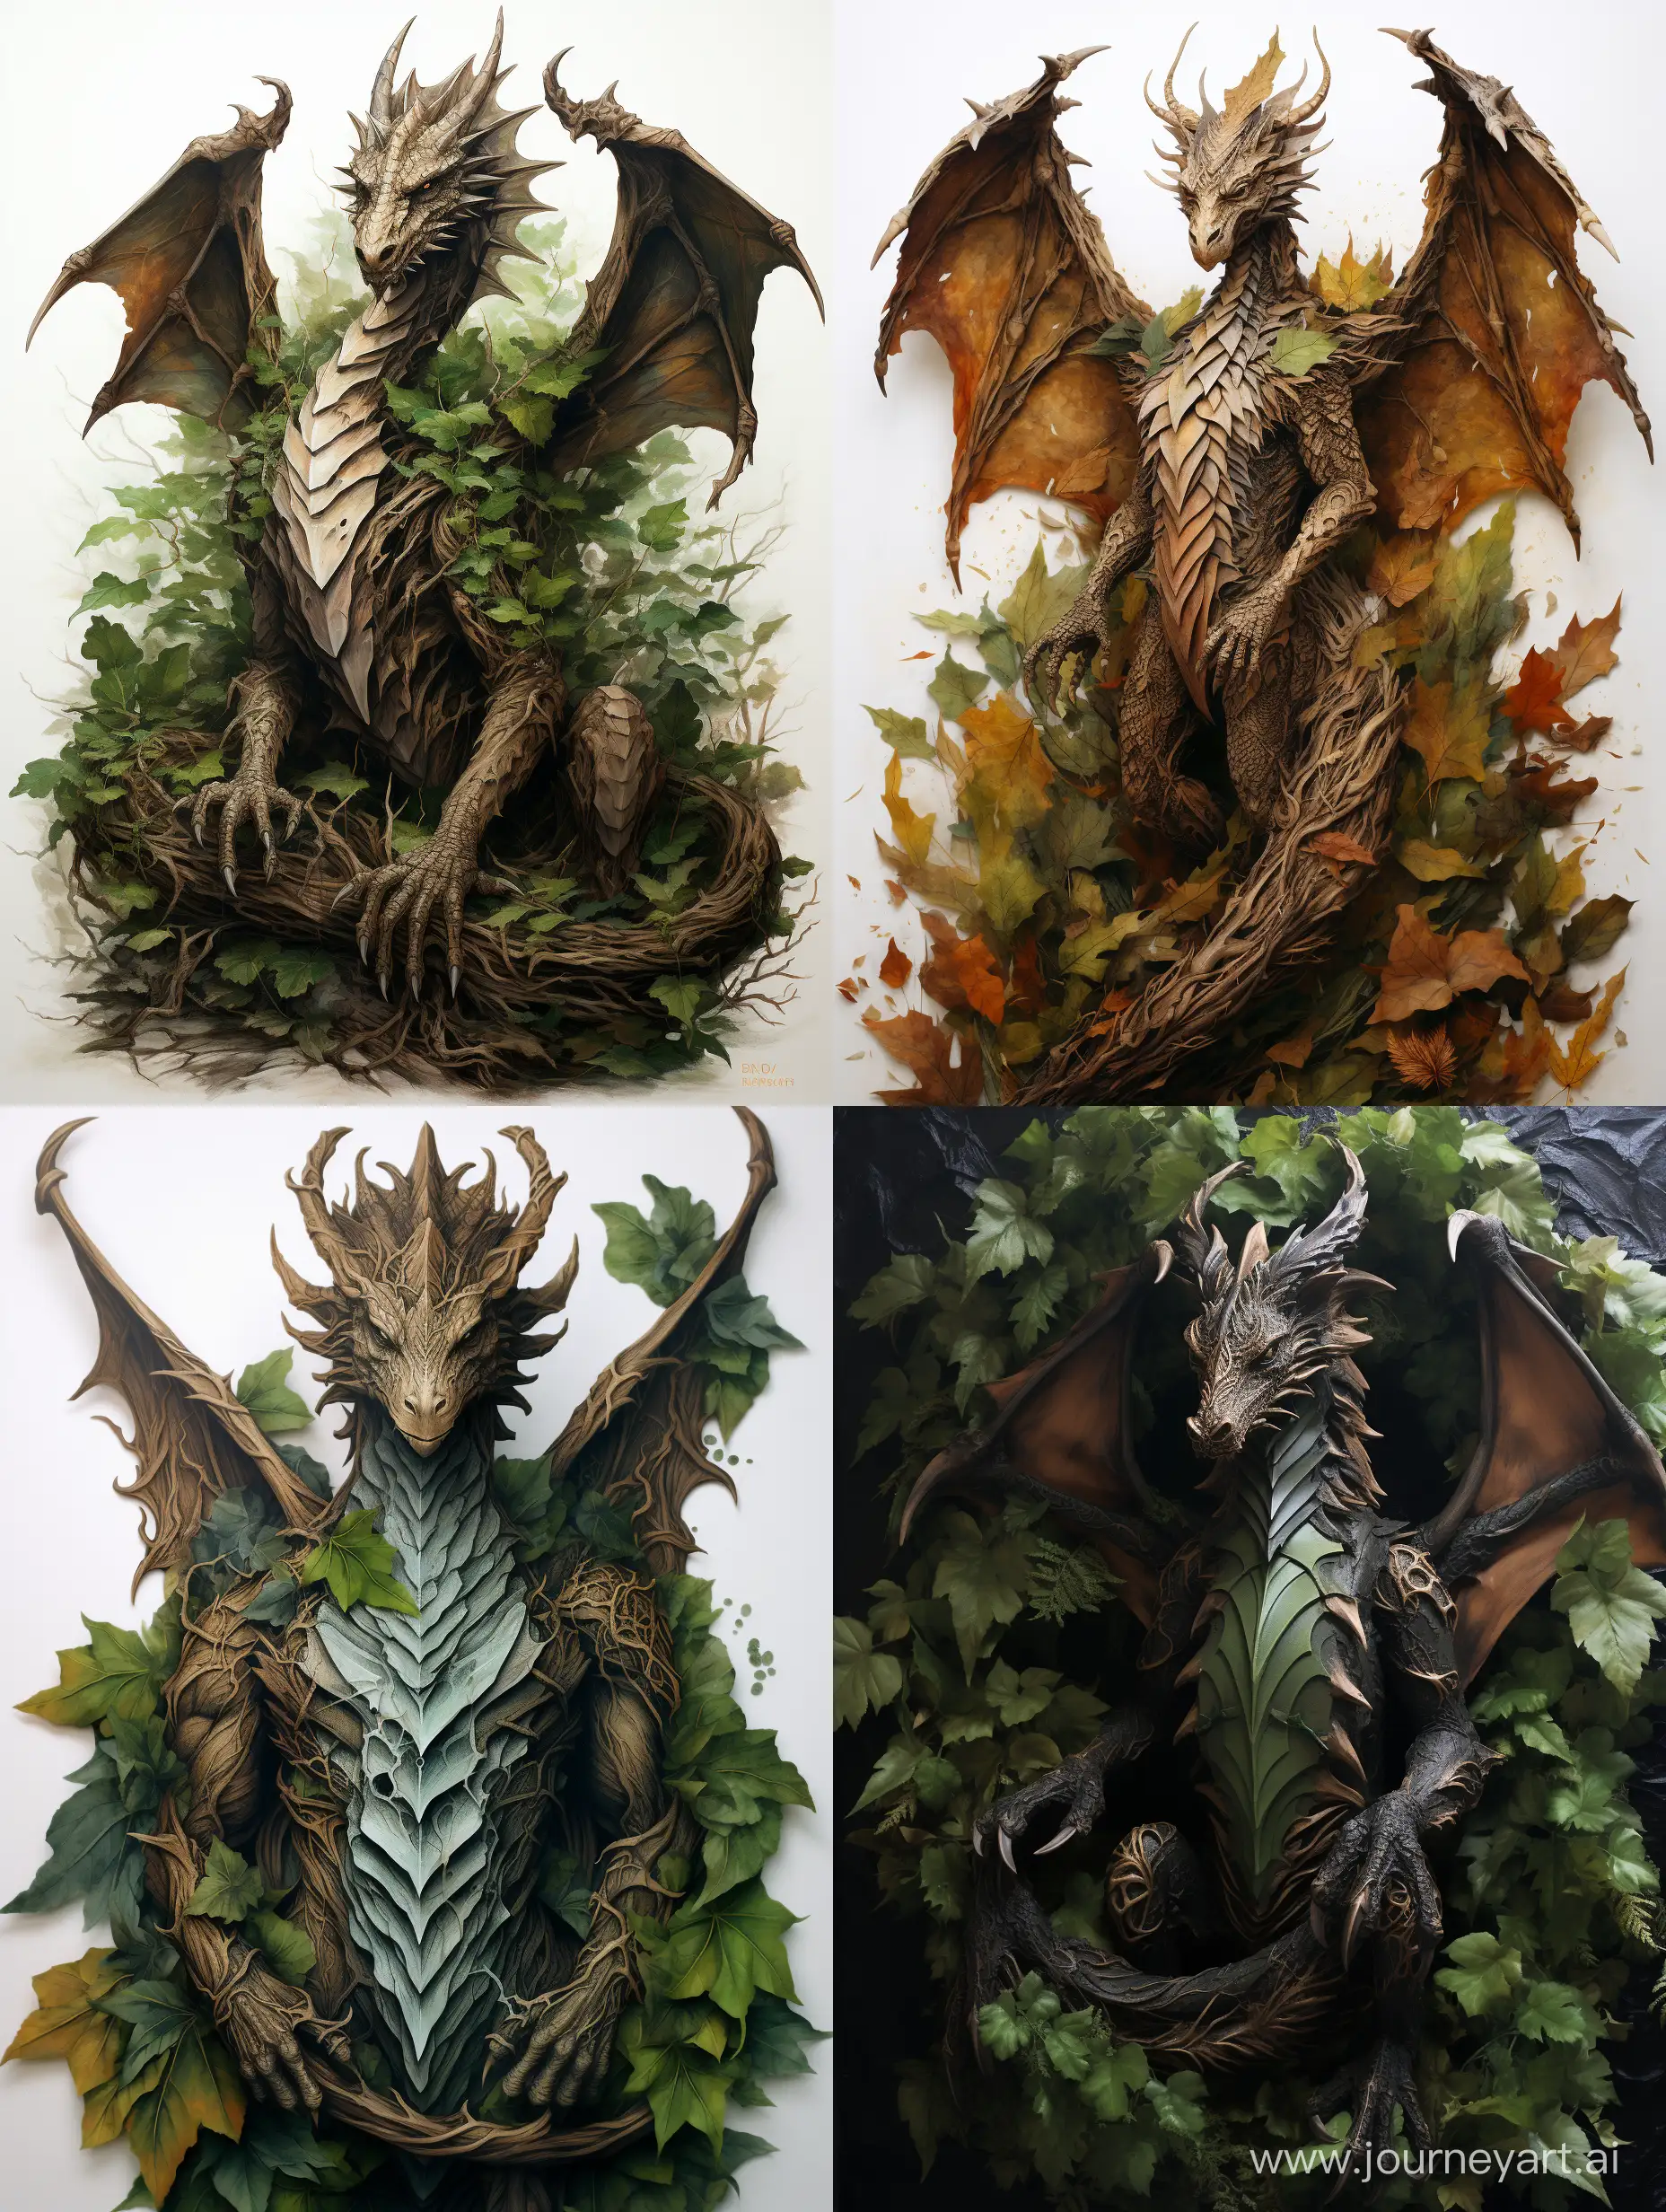 Full body of a Majestic Gothic Dragon made of oak leaves, 2D, Fantasy Art